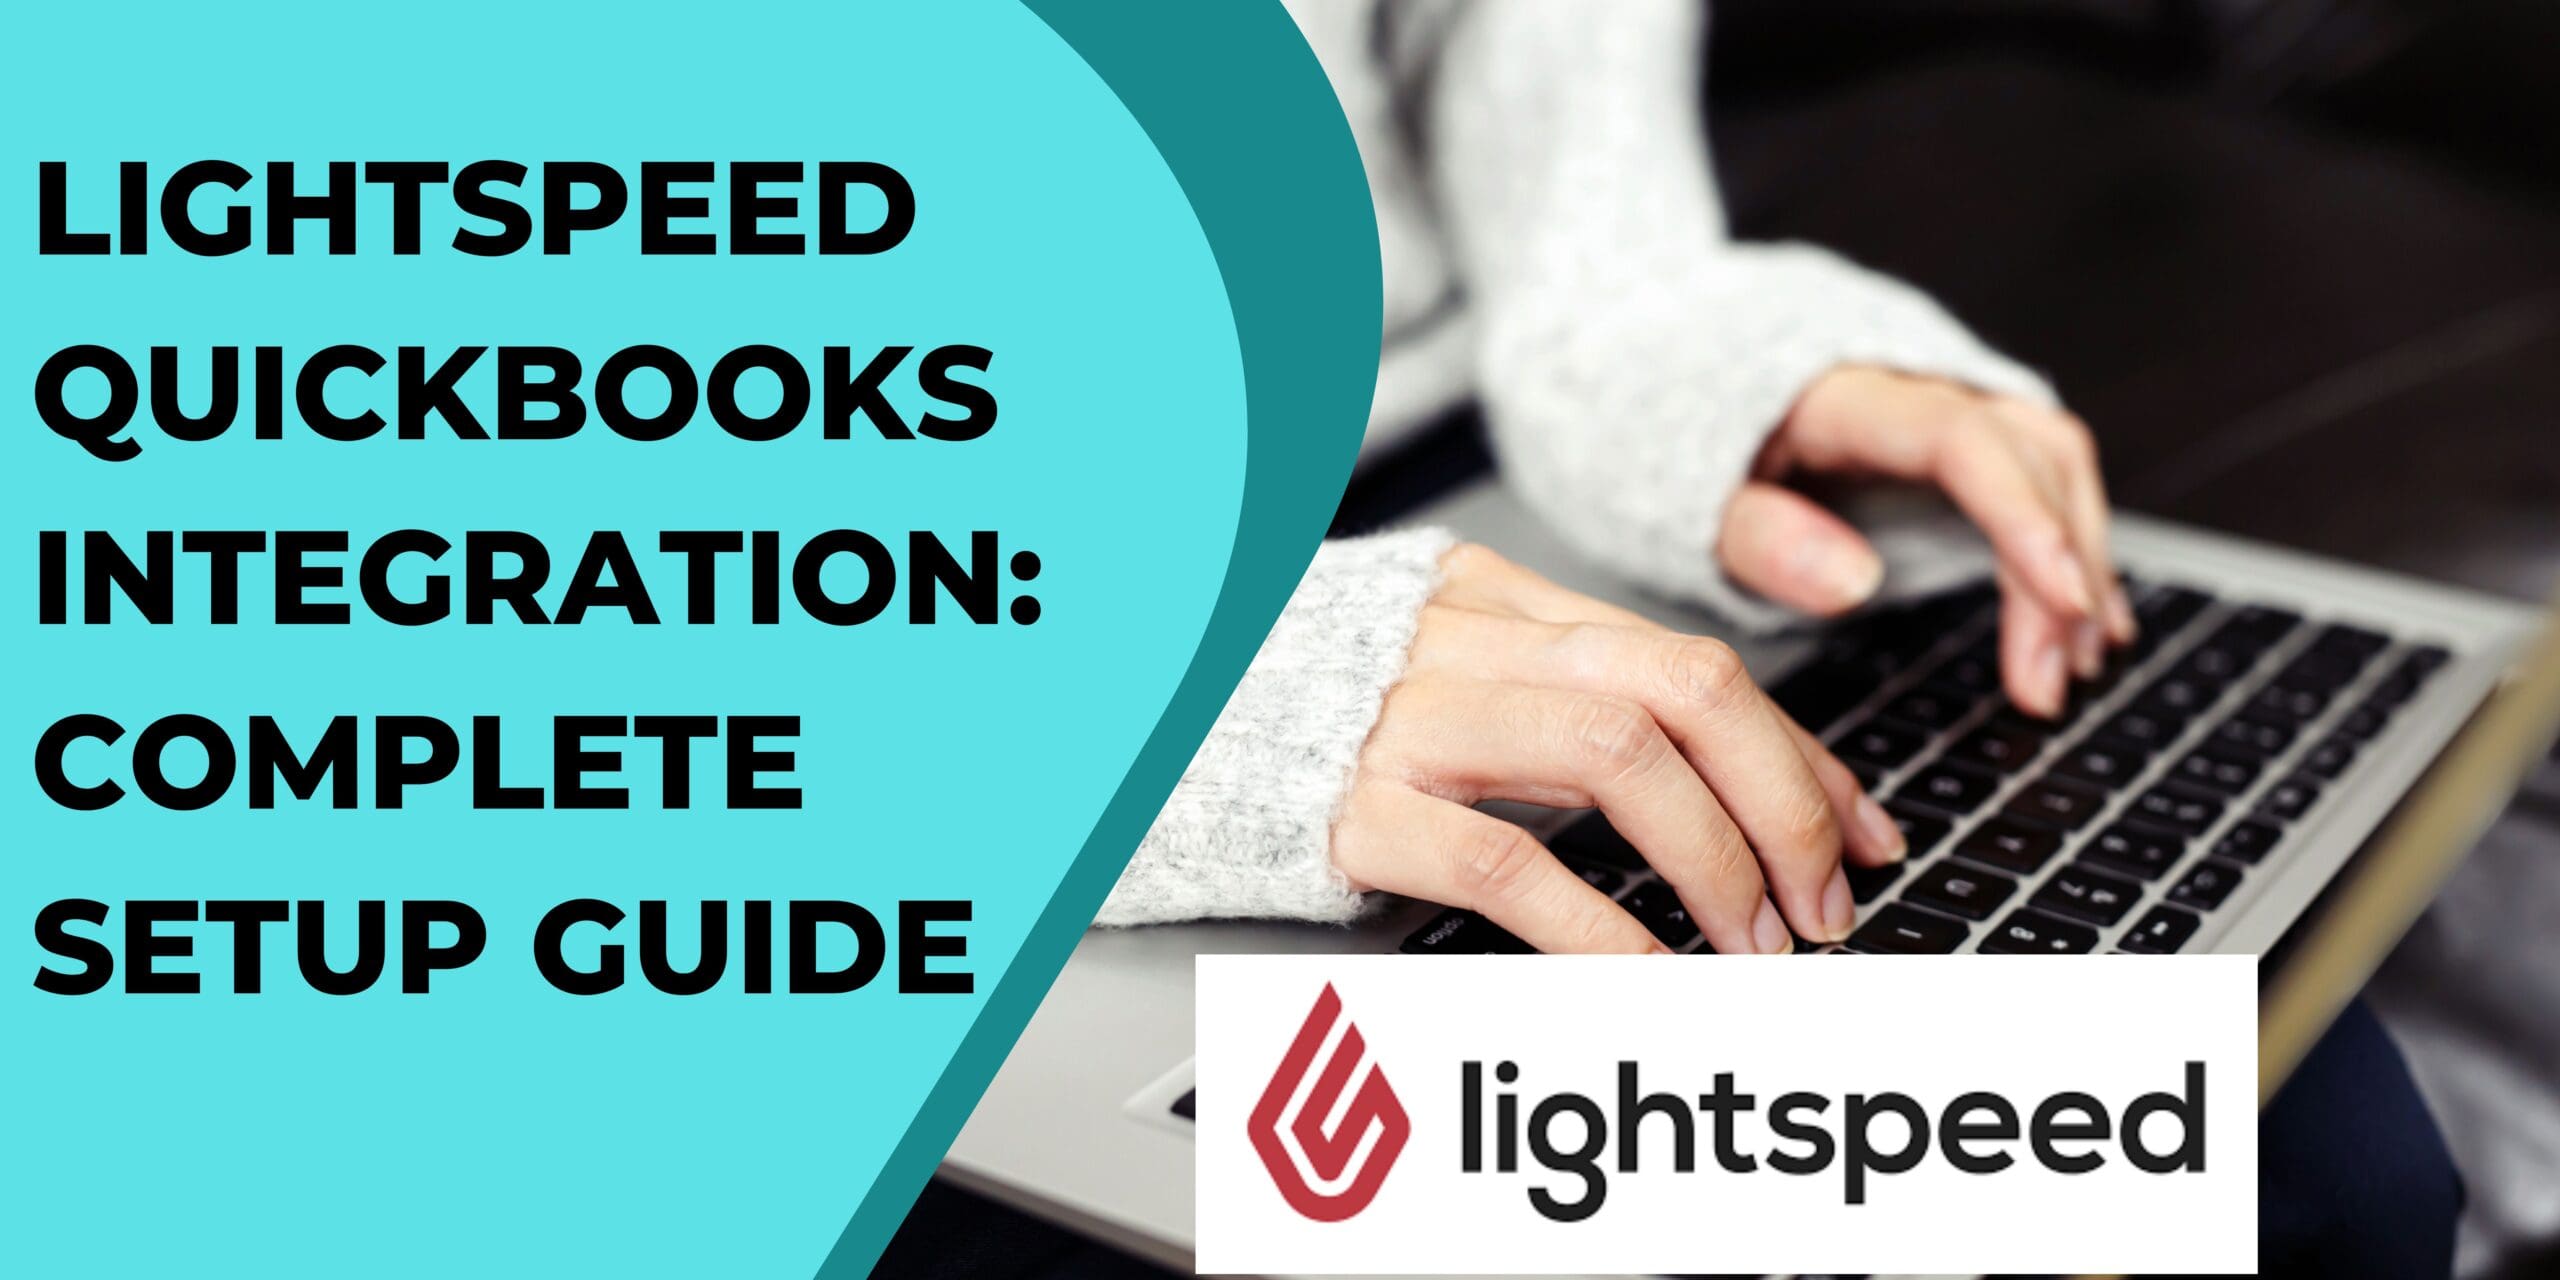 How to Do Lightspeed QuickBooks Integration? (Complete Guide)